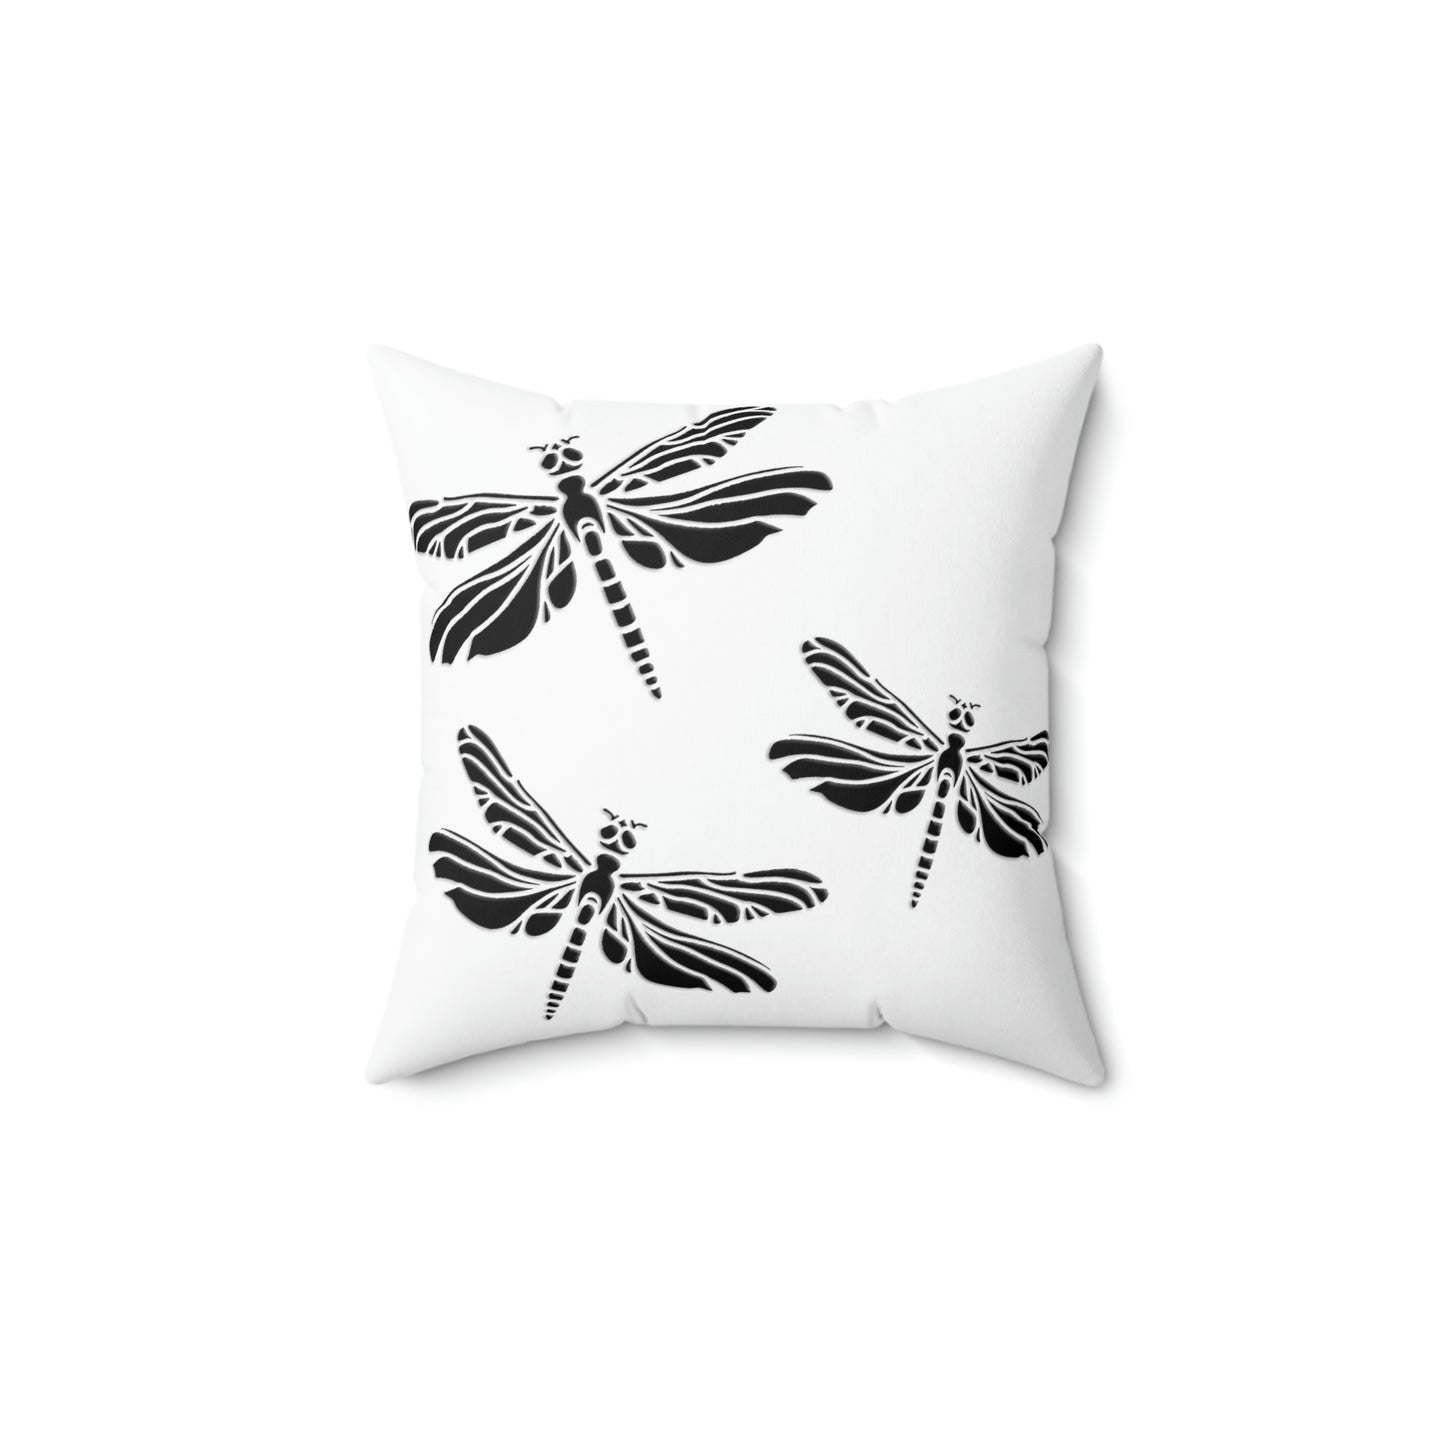 Minimalist square white pillow with 3 black Dragonflies 3 sizes available